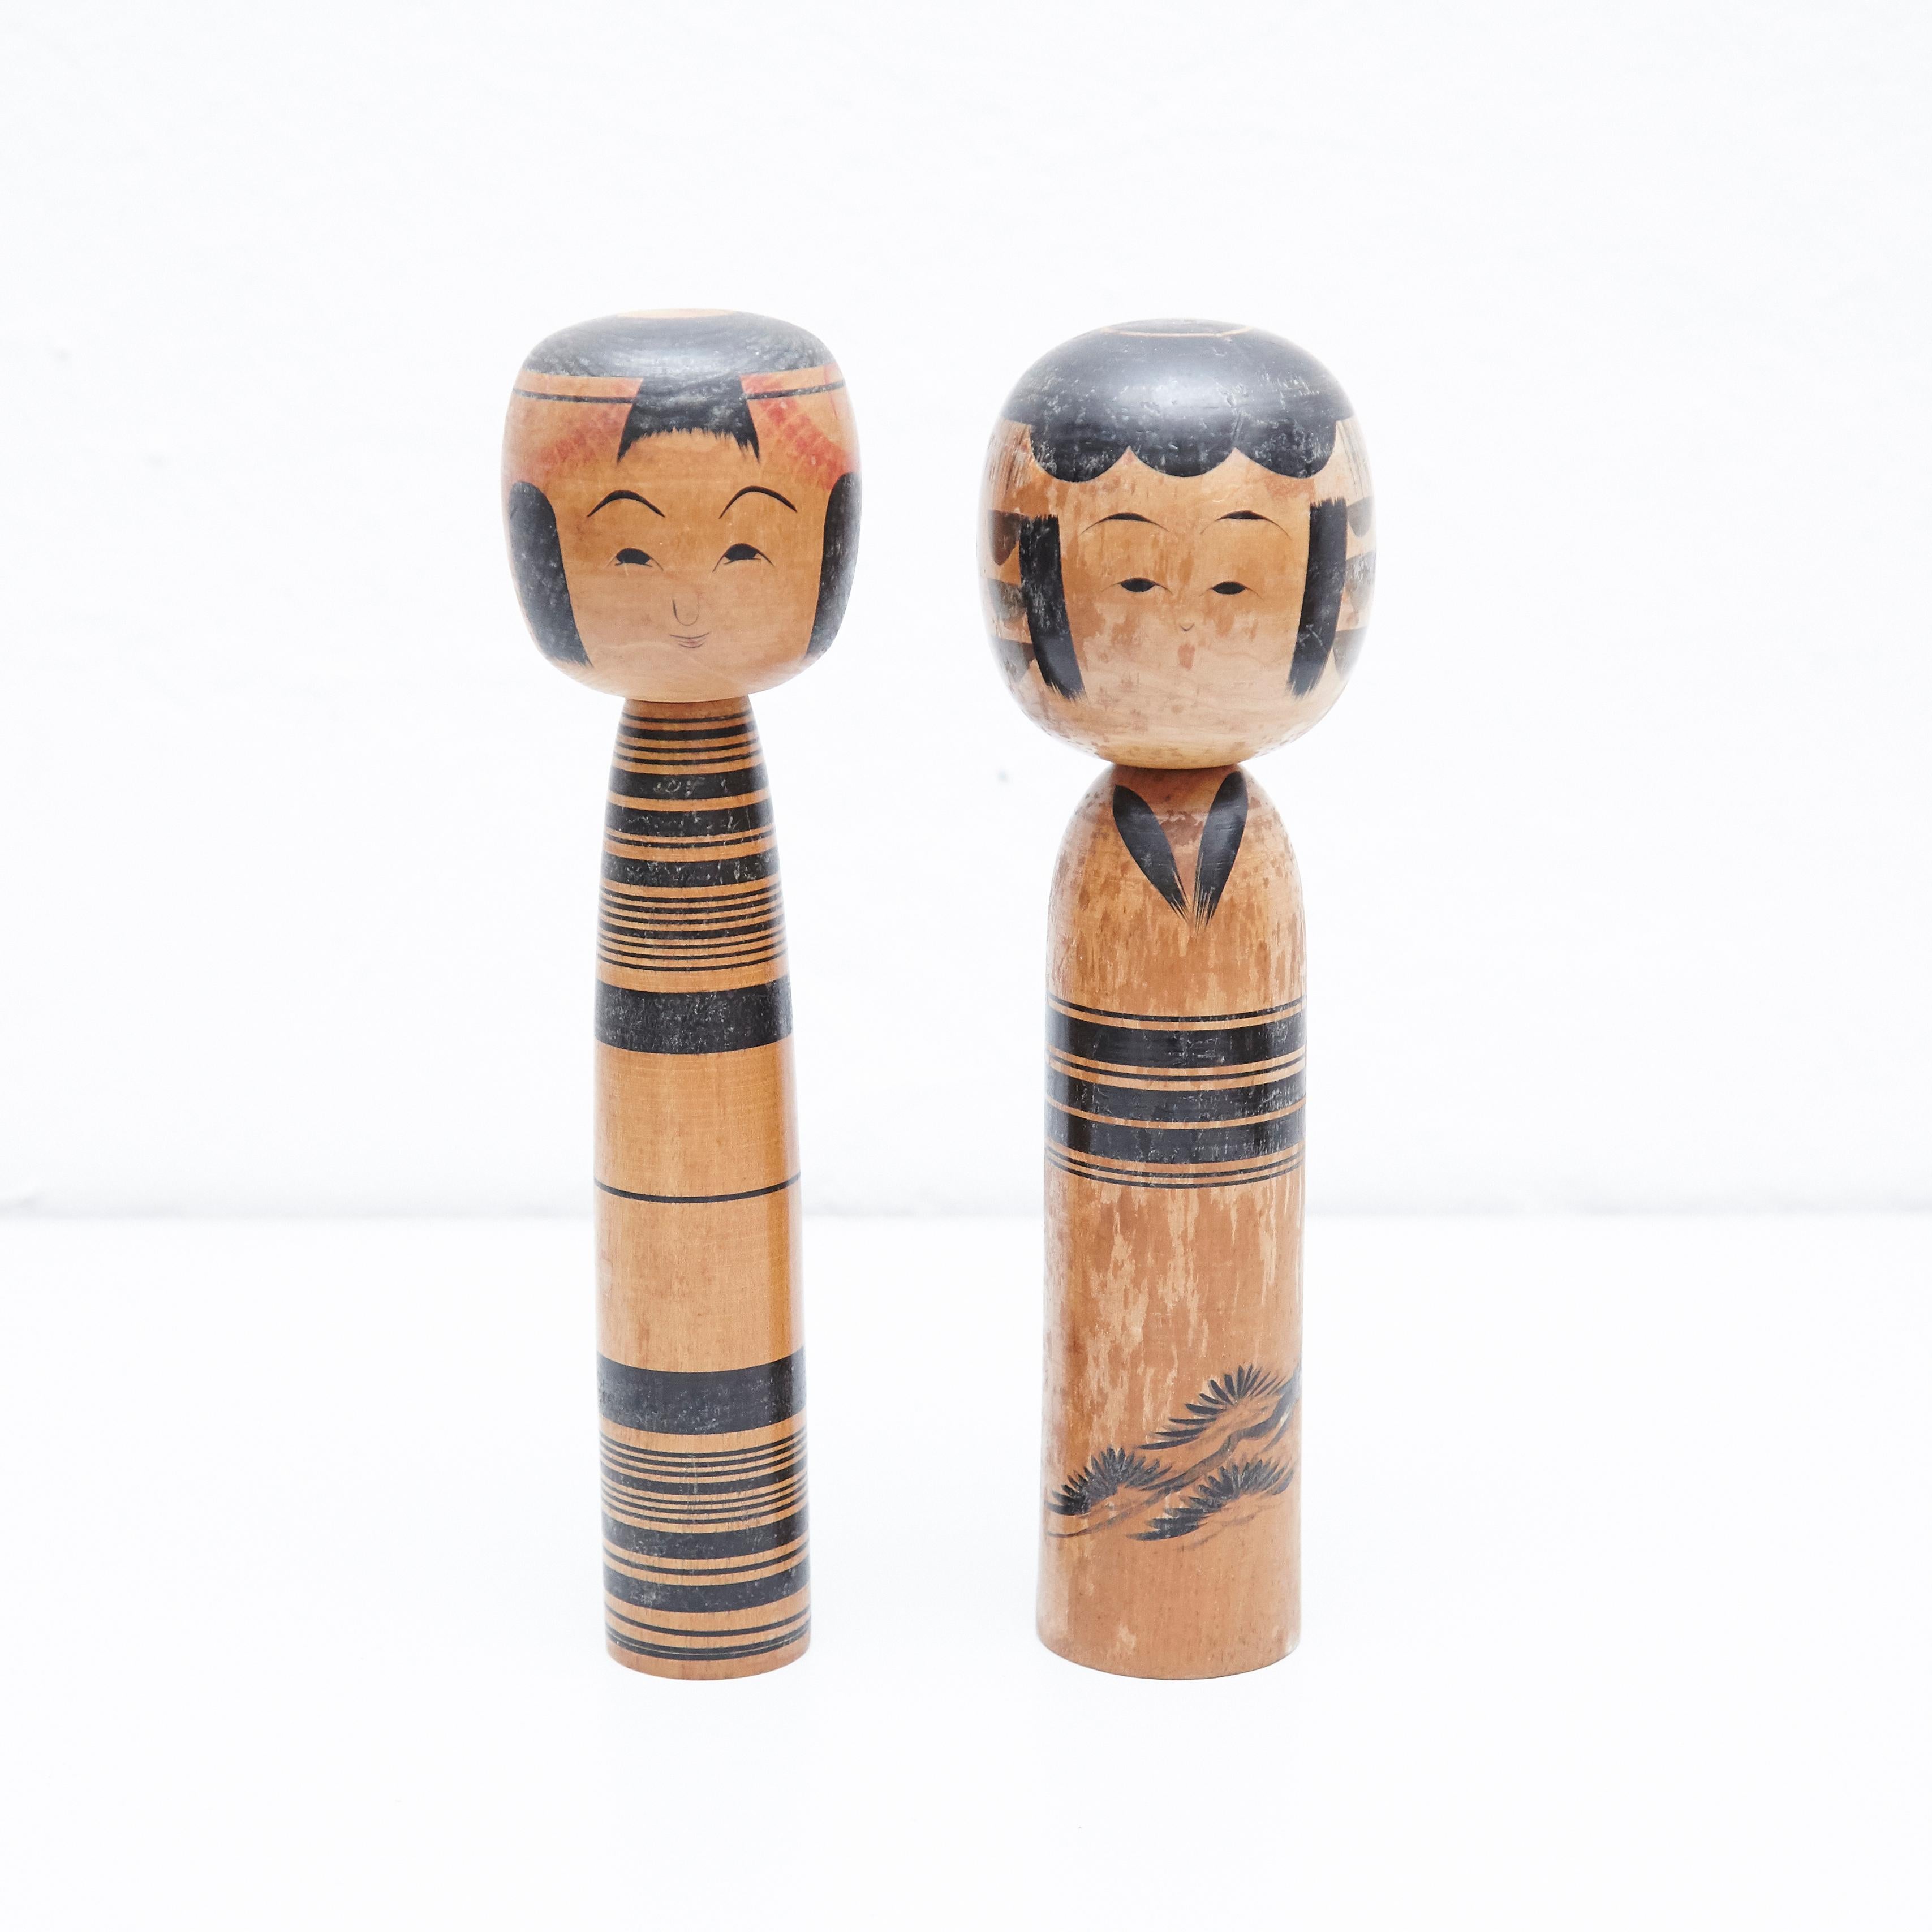 Japanese dolls called Kokeshi of the early 20th century.
Provenance from the northern Japan.
Set of 2.

Measures: 

24,5 x 7 cm
25 x 6,5 cm


Handmade by Japanese artisants from wood. Have a simple trunk as a body and an enlarged head. One